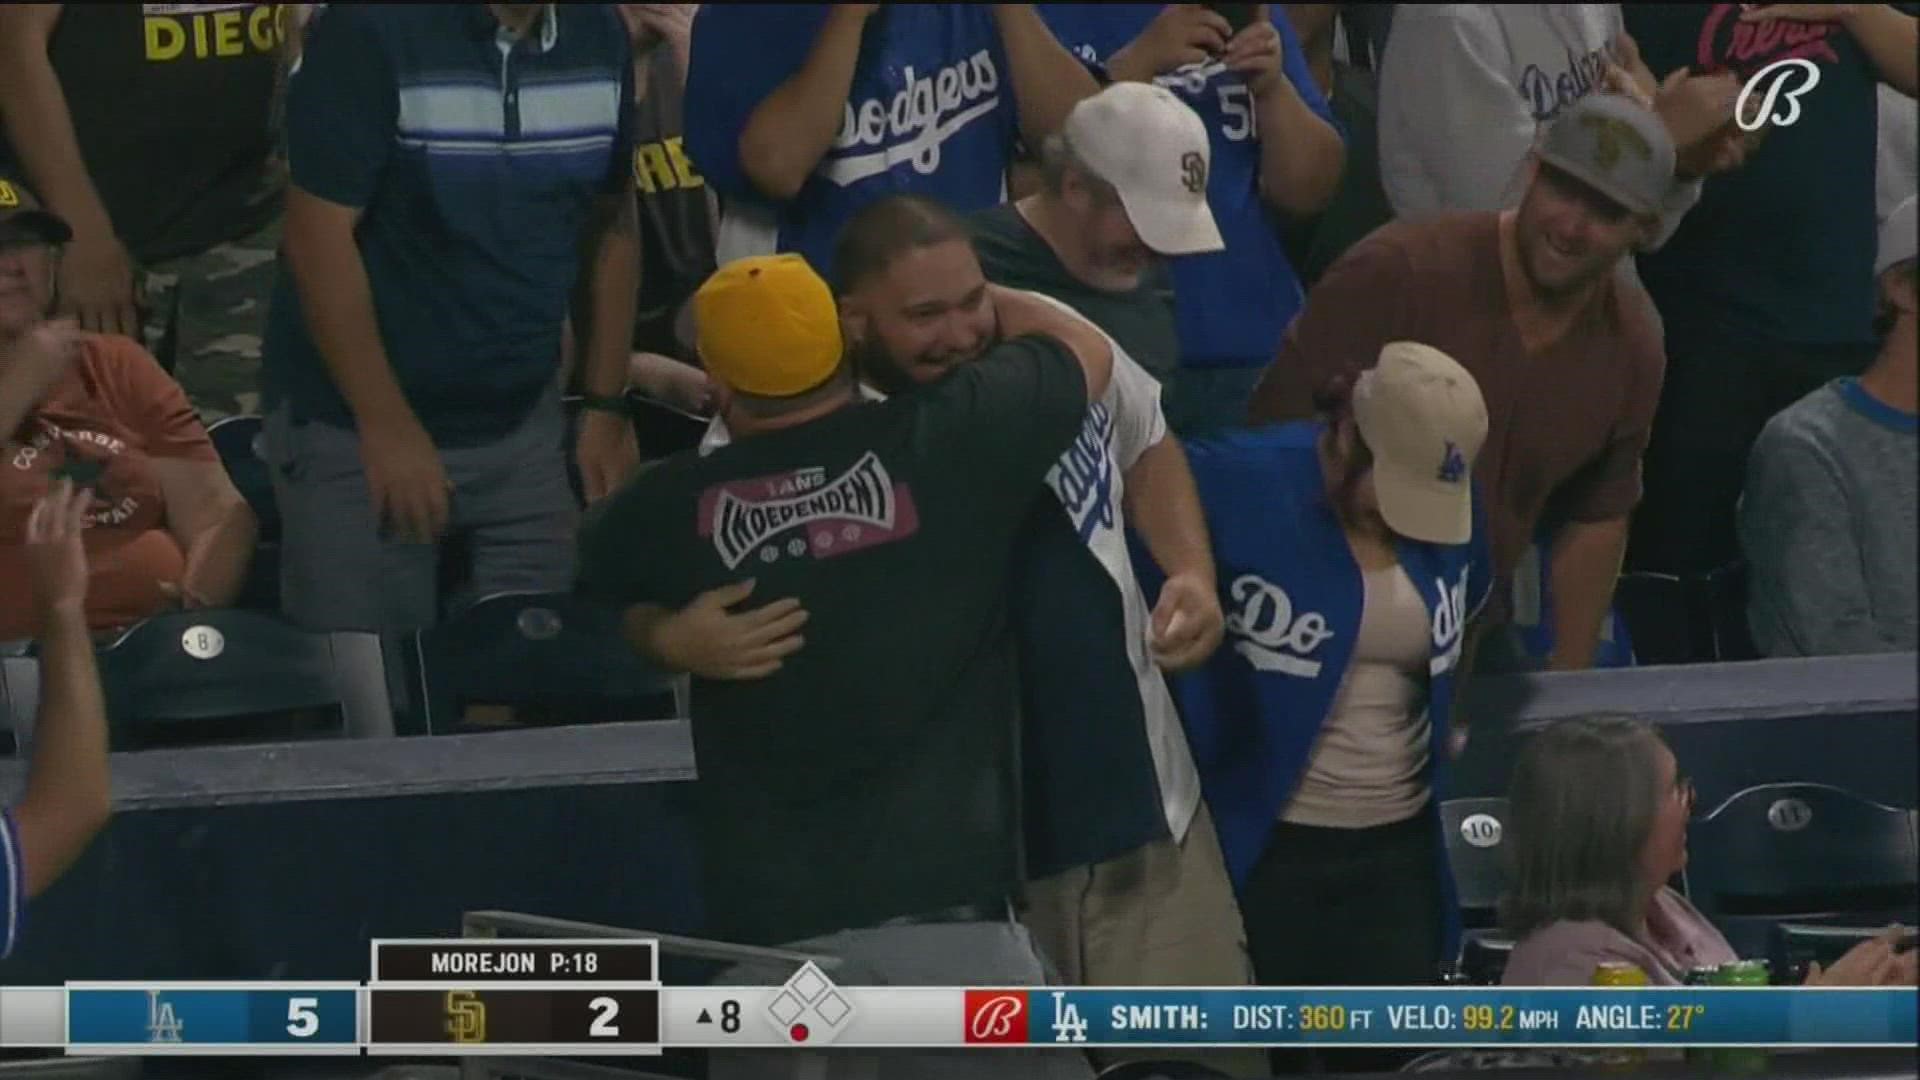 Padres fans appreciate rivalry with Dodgers cbs8